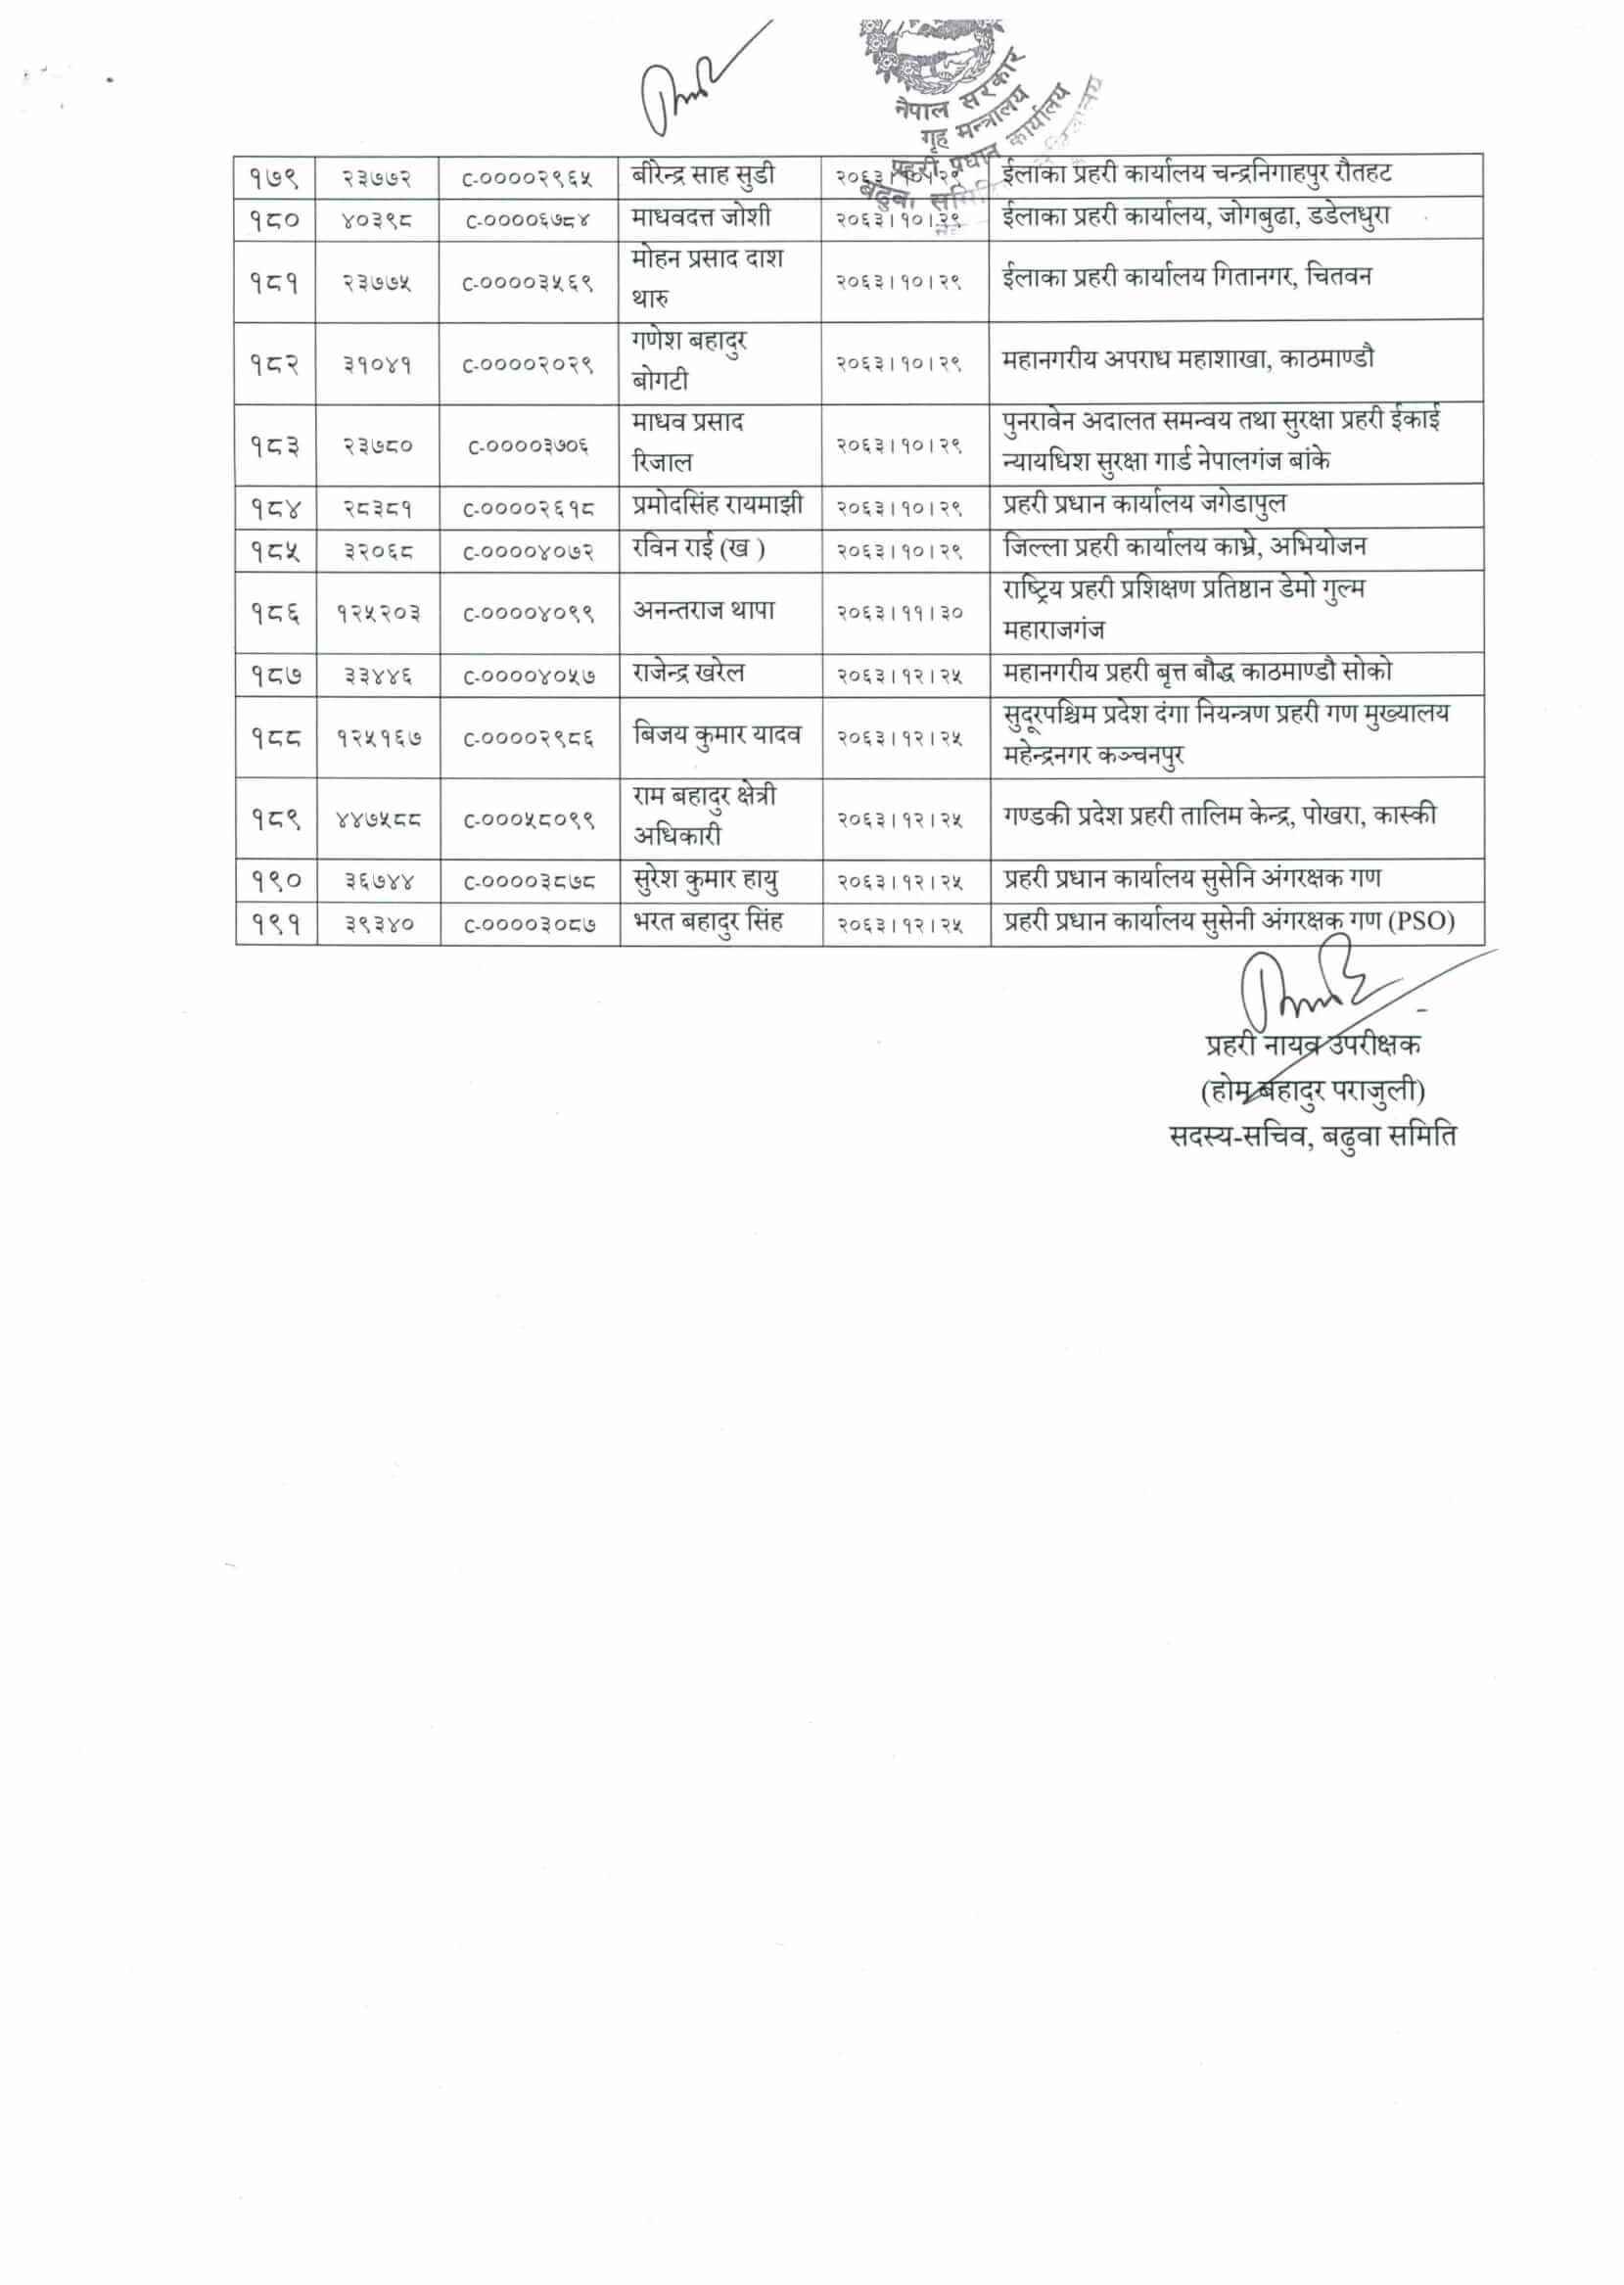 Nepal Police Senior Sub-Inspector Promotion Recommend List